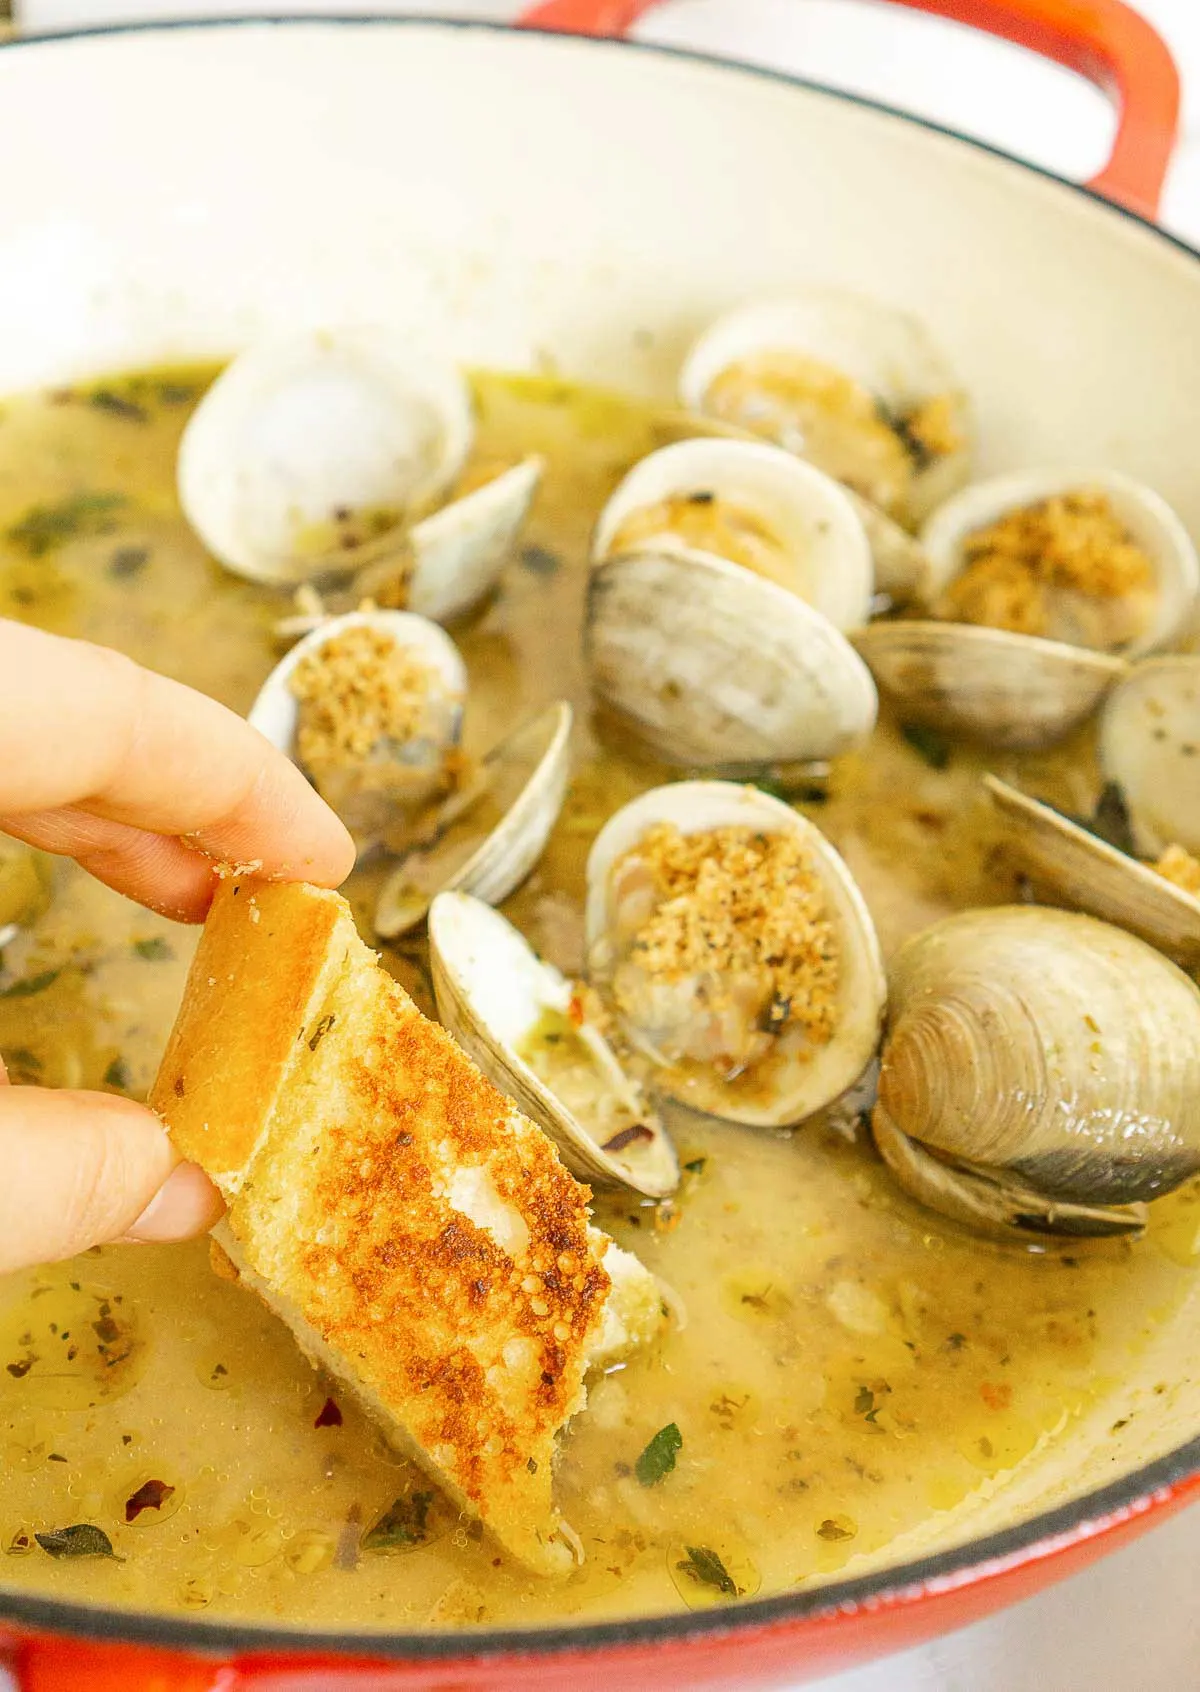 Dipping bread into white wine sauce for clams